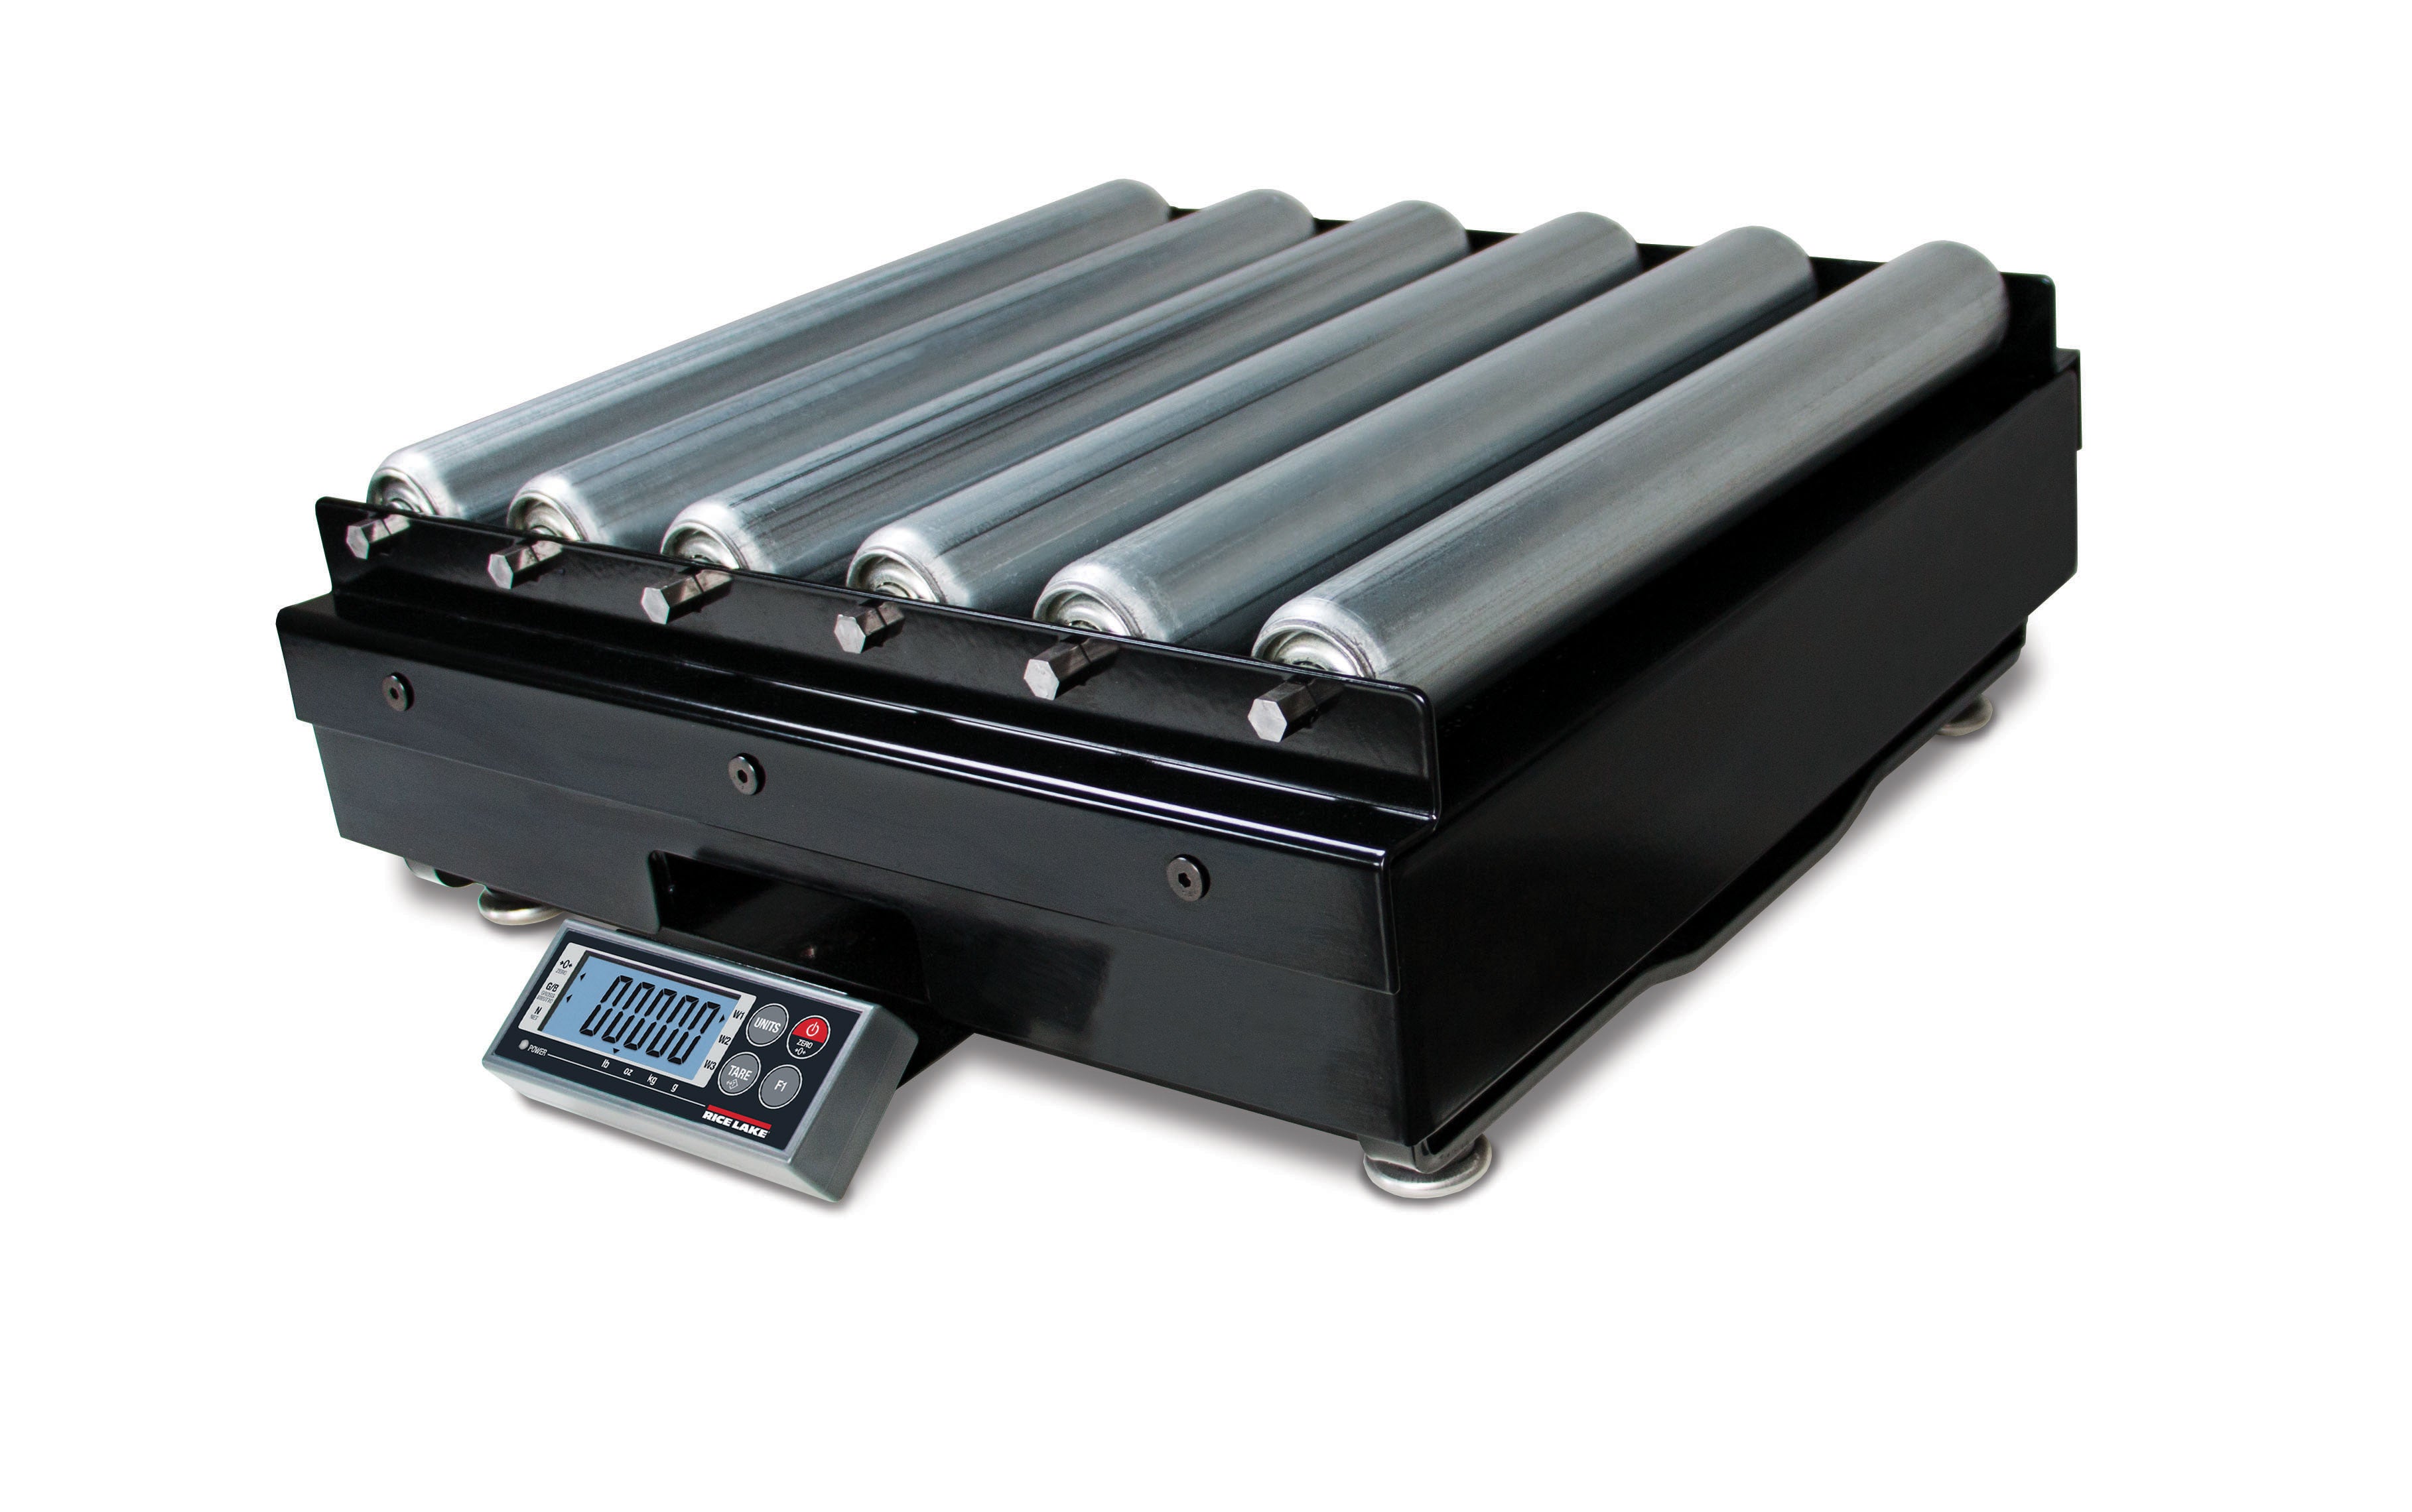 Rice Lake 182996 150 x 0.05lb/75 x 0.02kg, BP 1216-75S Shipping Digital Scale, Roller Conveyor Top with 2 years Warranty